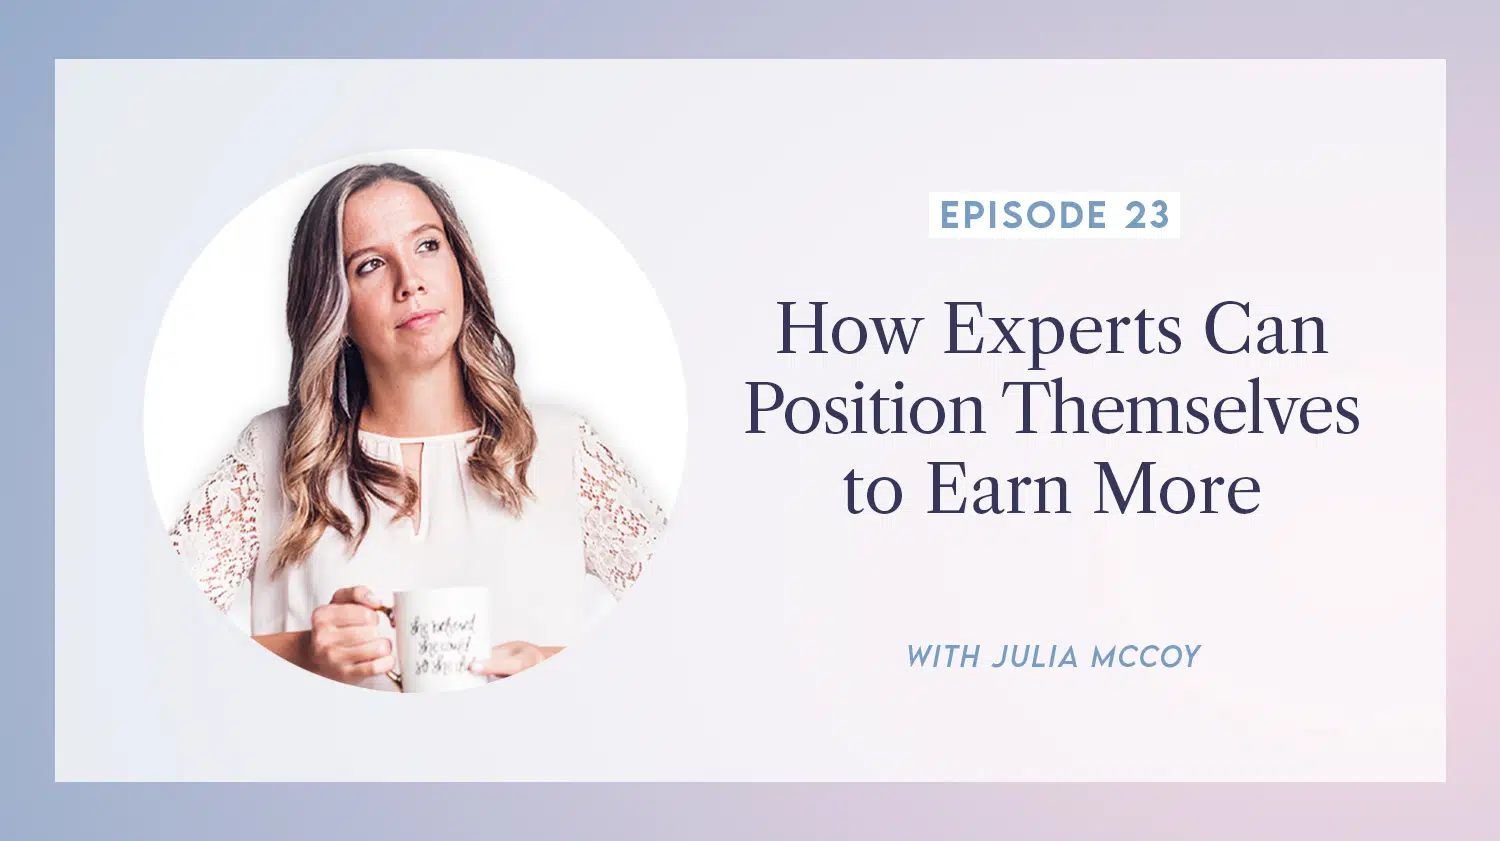 content transformation podcast with julia mccoy episode 23 how experts can position themselves to earn more